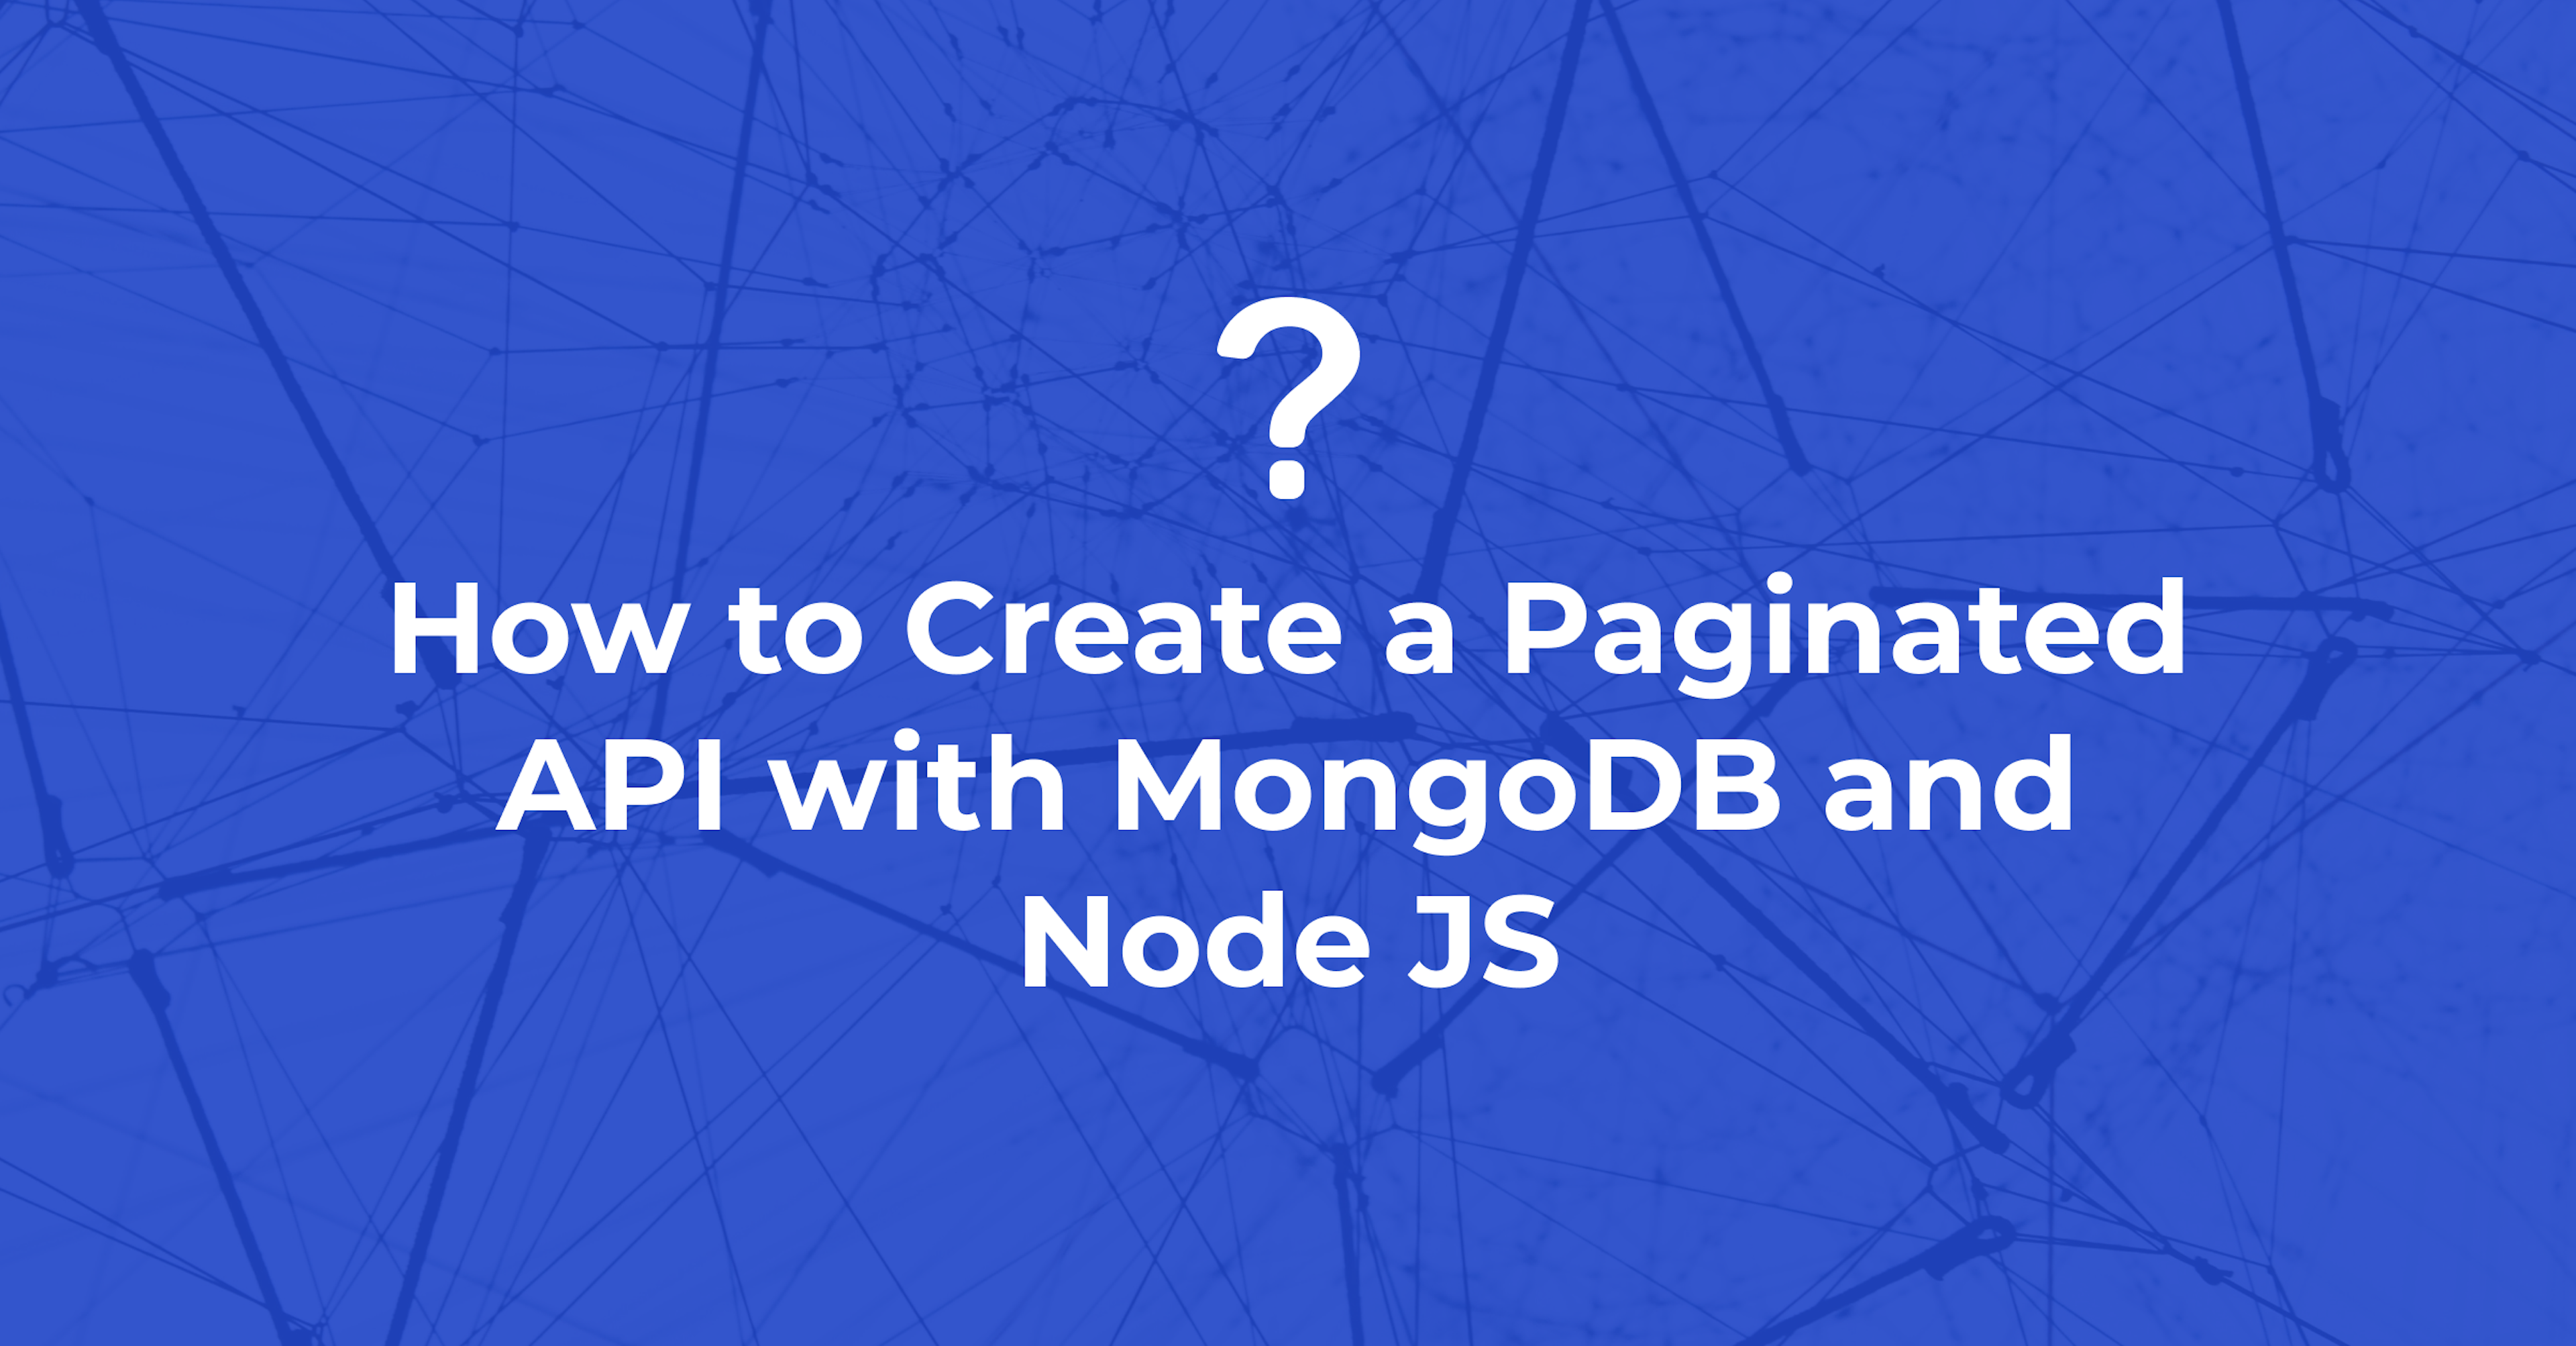 How to Create a Paginated API with MongoDB and Node JS